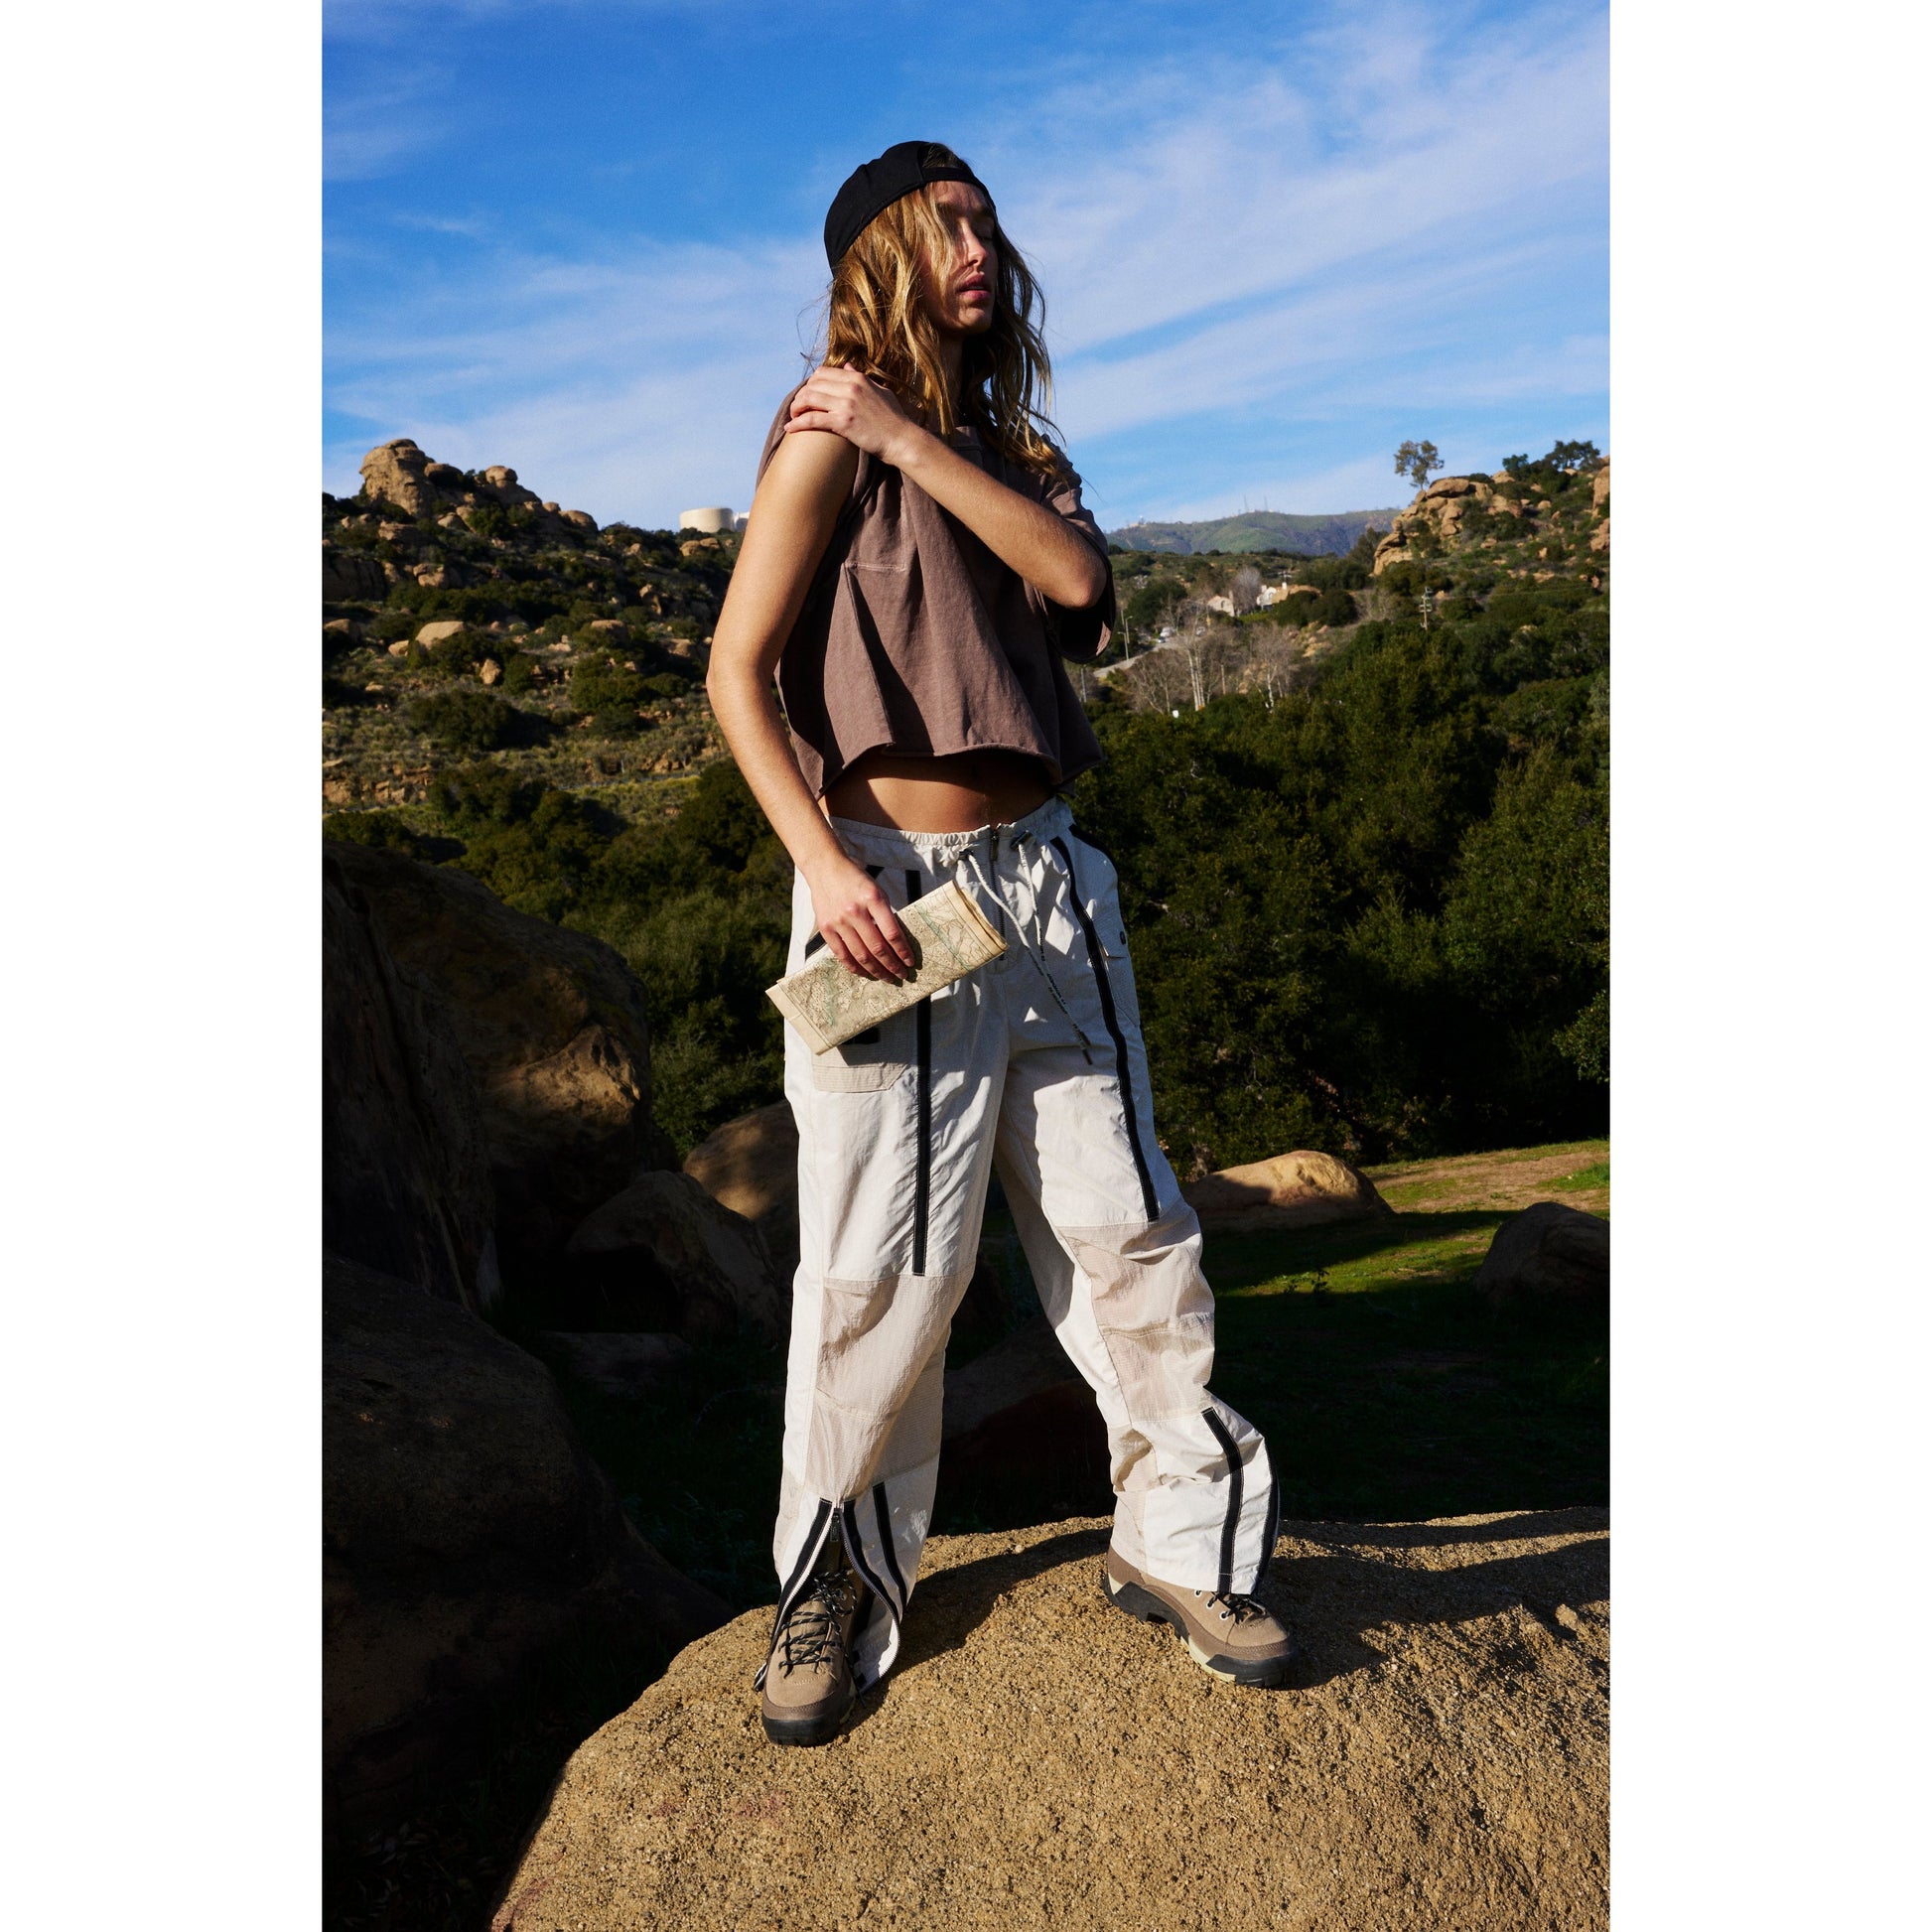 A person with long hair wearing a Free People Movement Inspire Tee in Wild Mustang, oversized boxy fit crop top, cargo pants, and boots stands holding a book in a rugged outdoor setting with hills in the background.